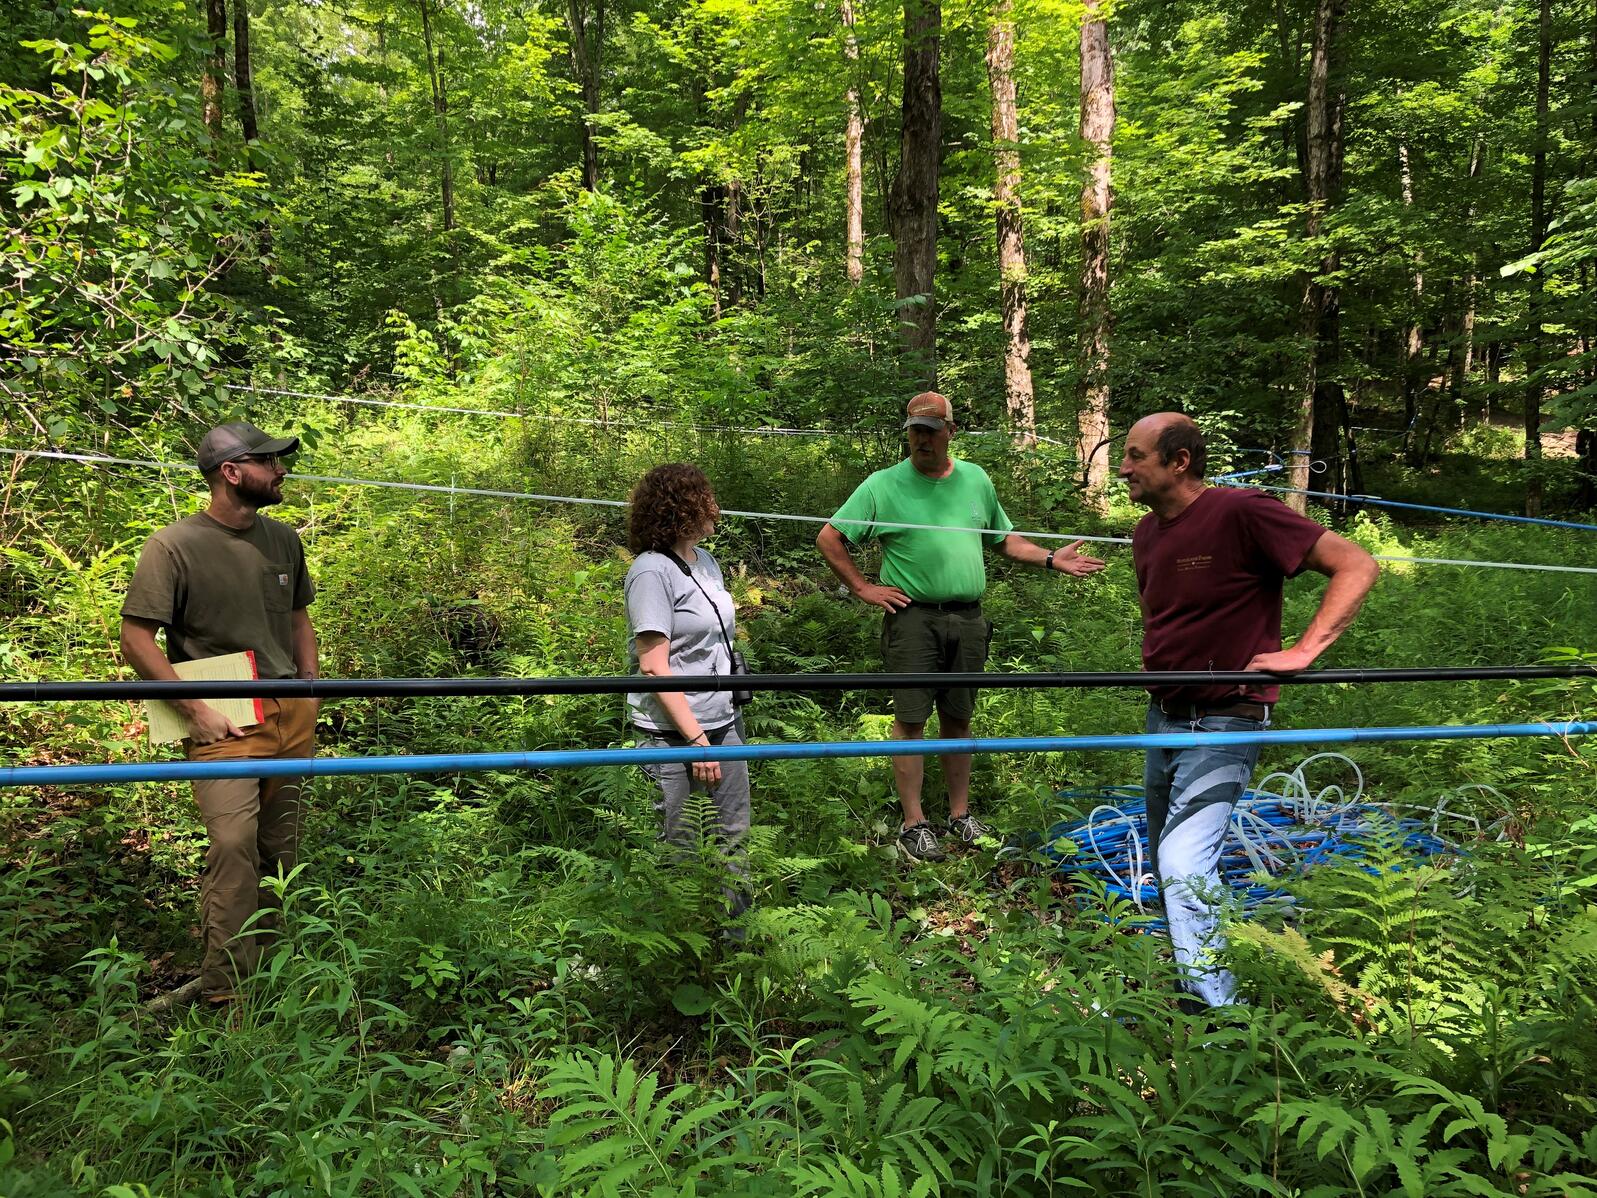 Audubon New York and Mapleland Farms staff look at management options in the sugarbush.